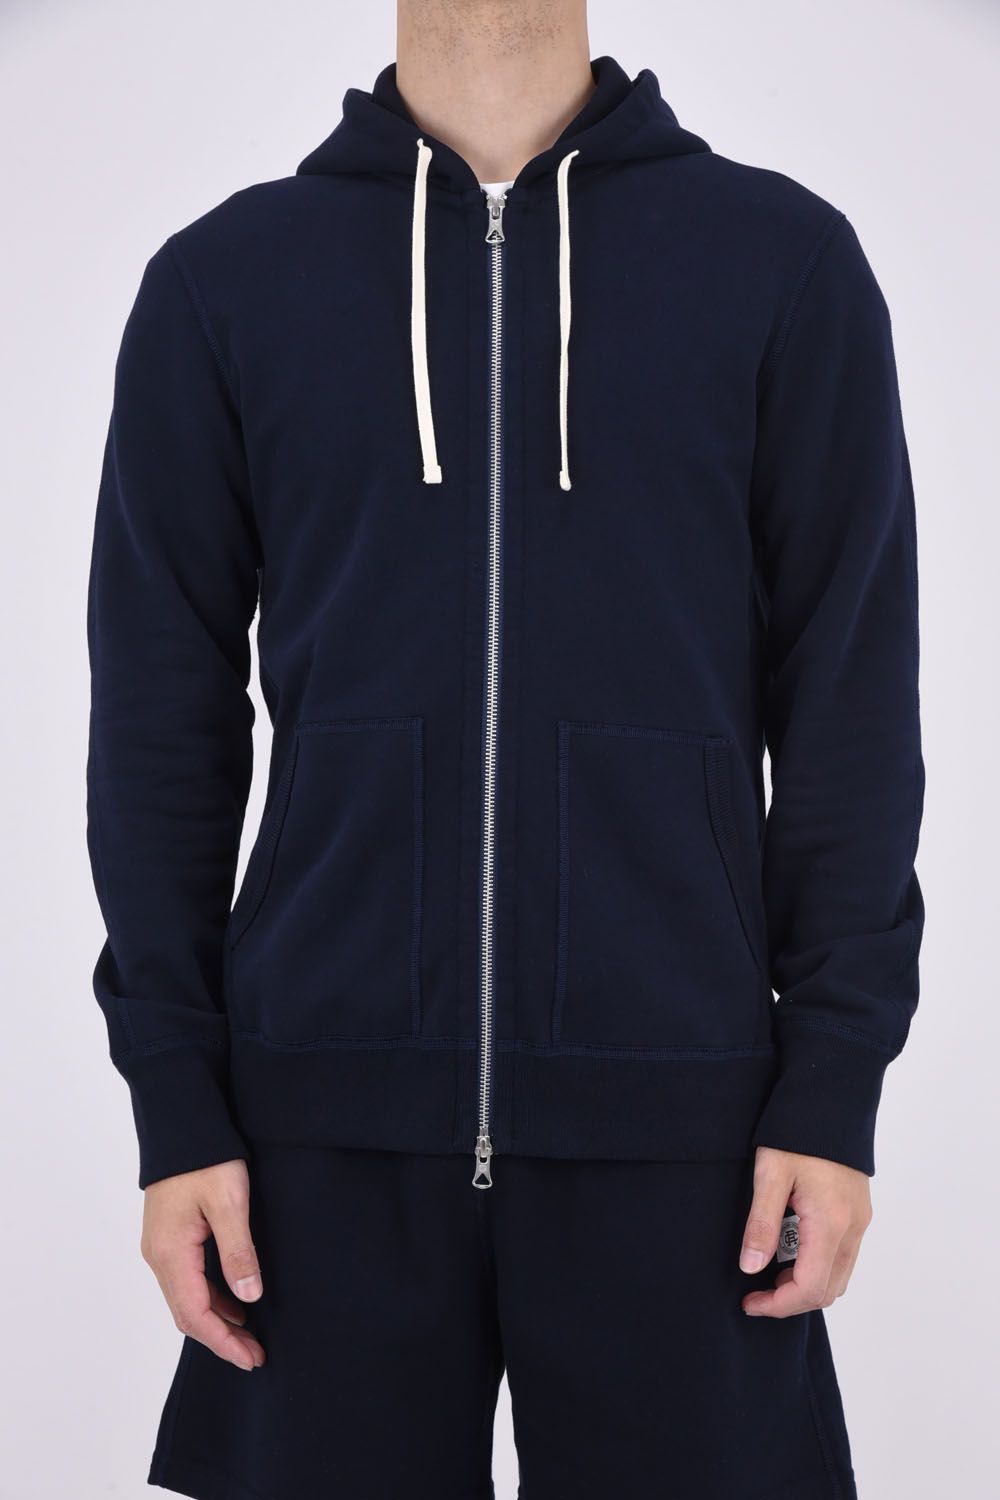 REIGNING CHAMP - 【国内正規品】 MIDWEIGHT TERRY FULL ZIP HOODIE ...